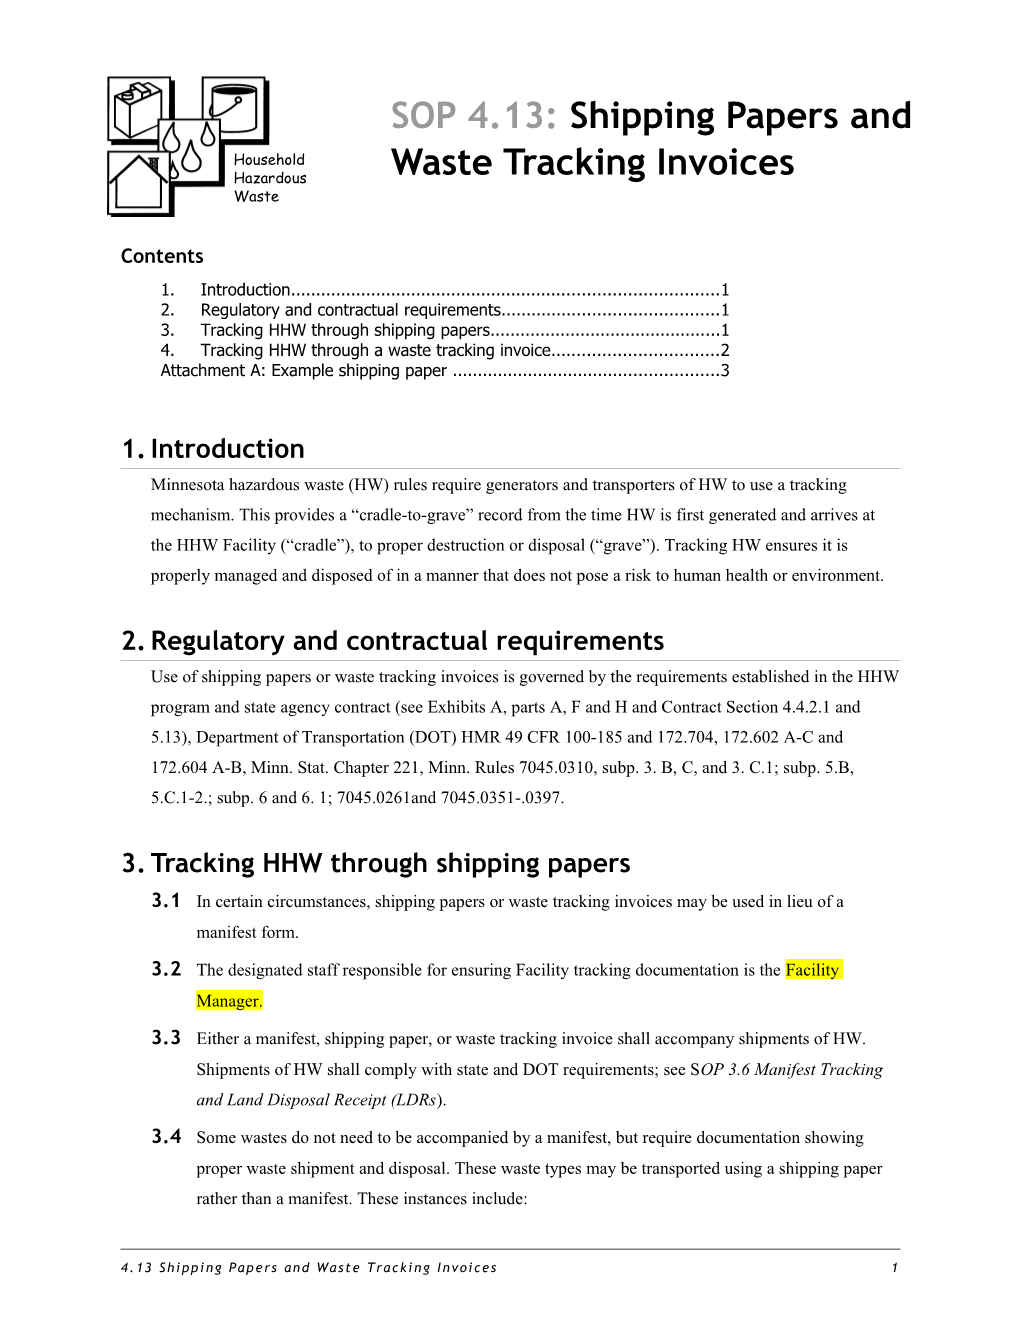 SOP 4.13 Shipping Papers and Waste Tracking Invoices